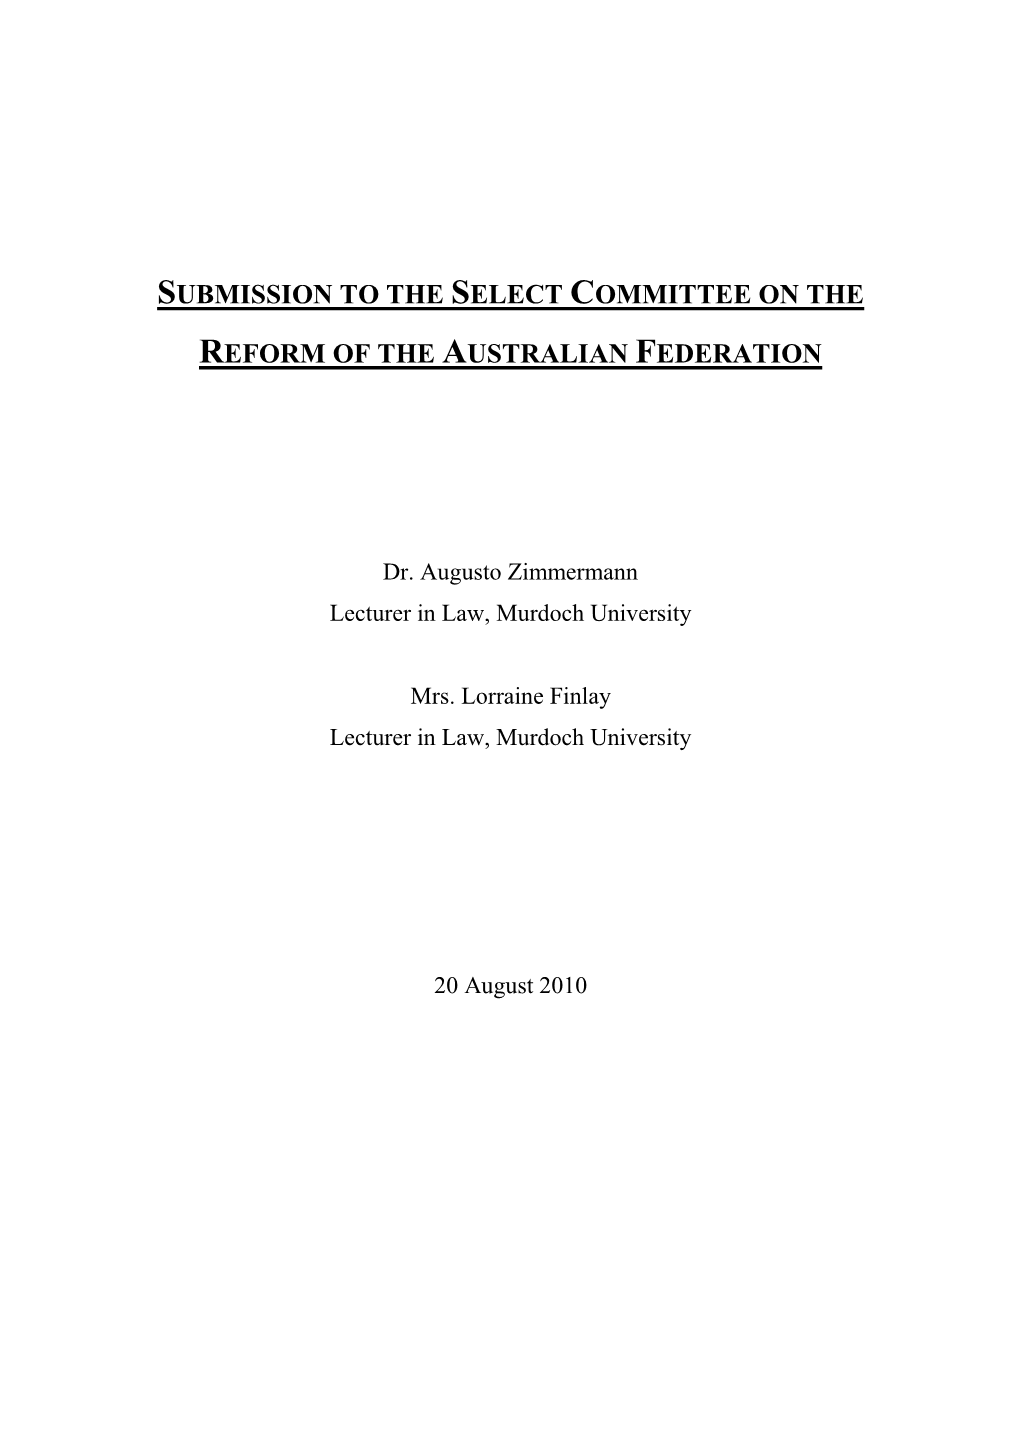 Submission to the Select Committee on the Reform of the Australian Federation